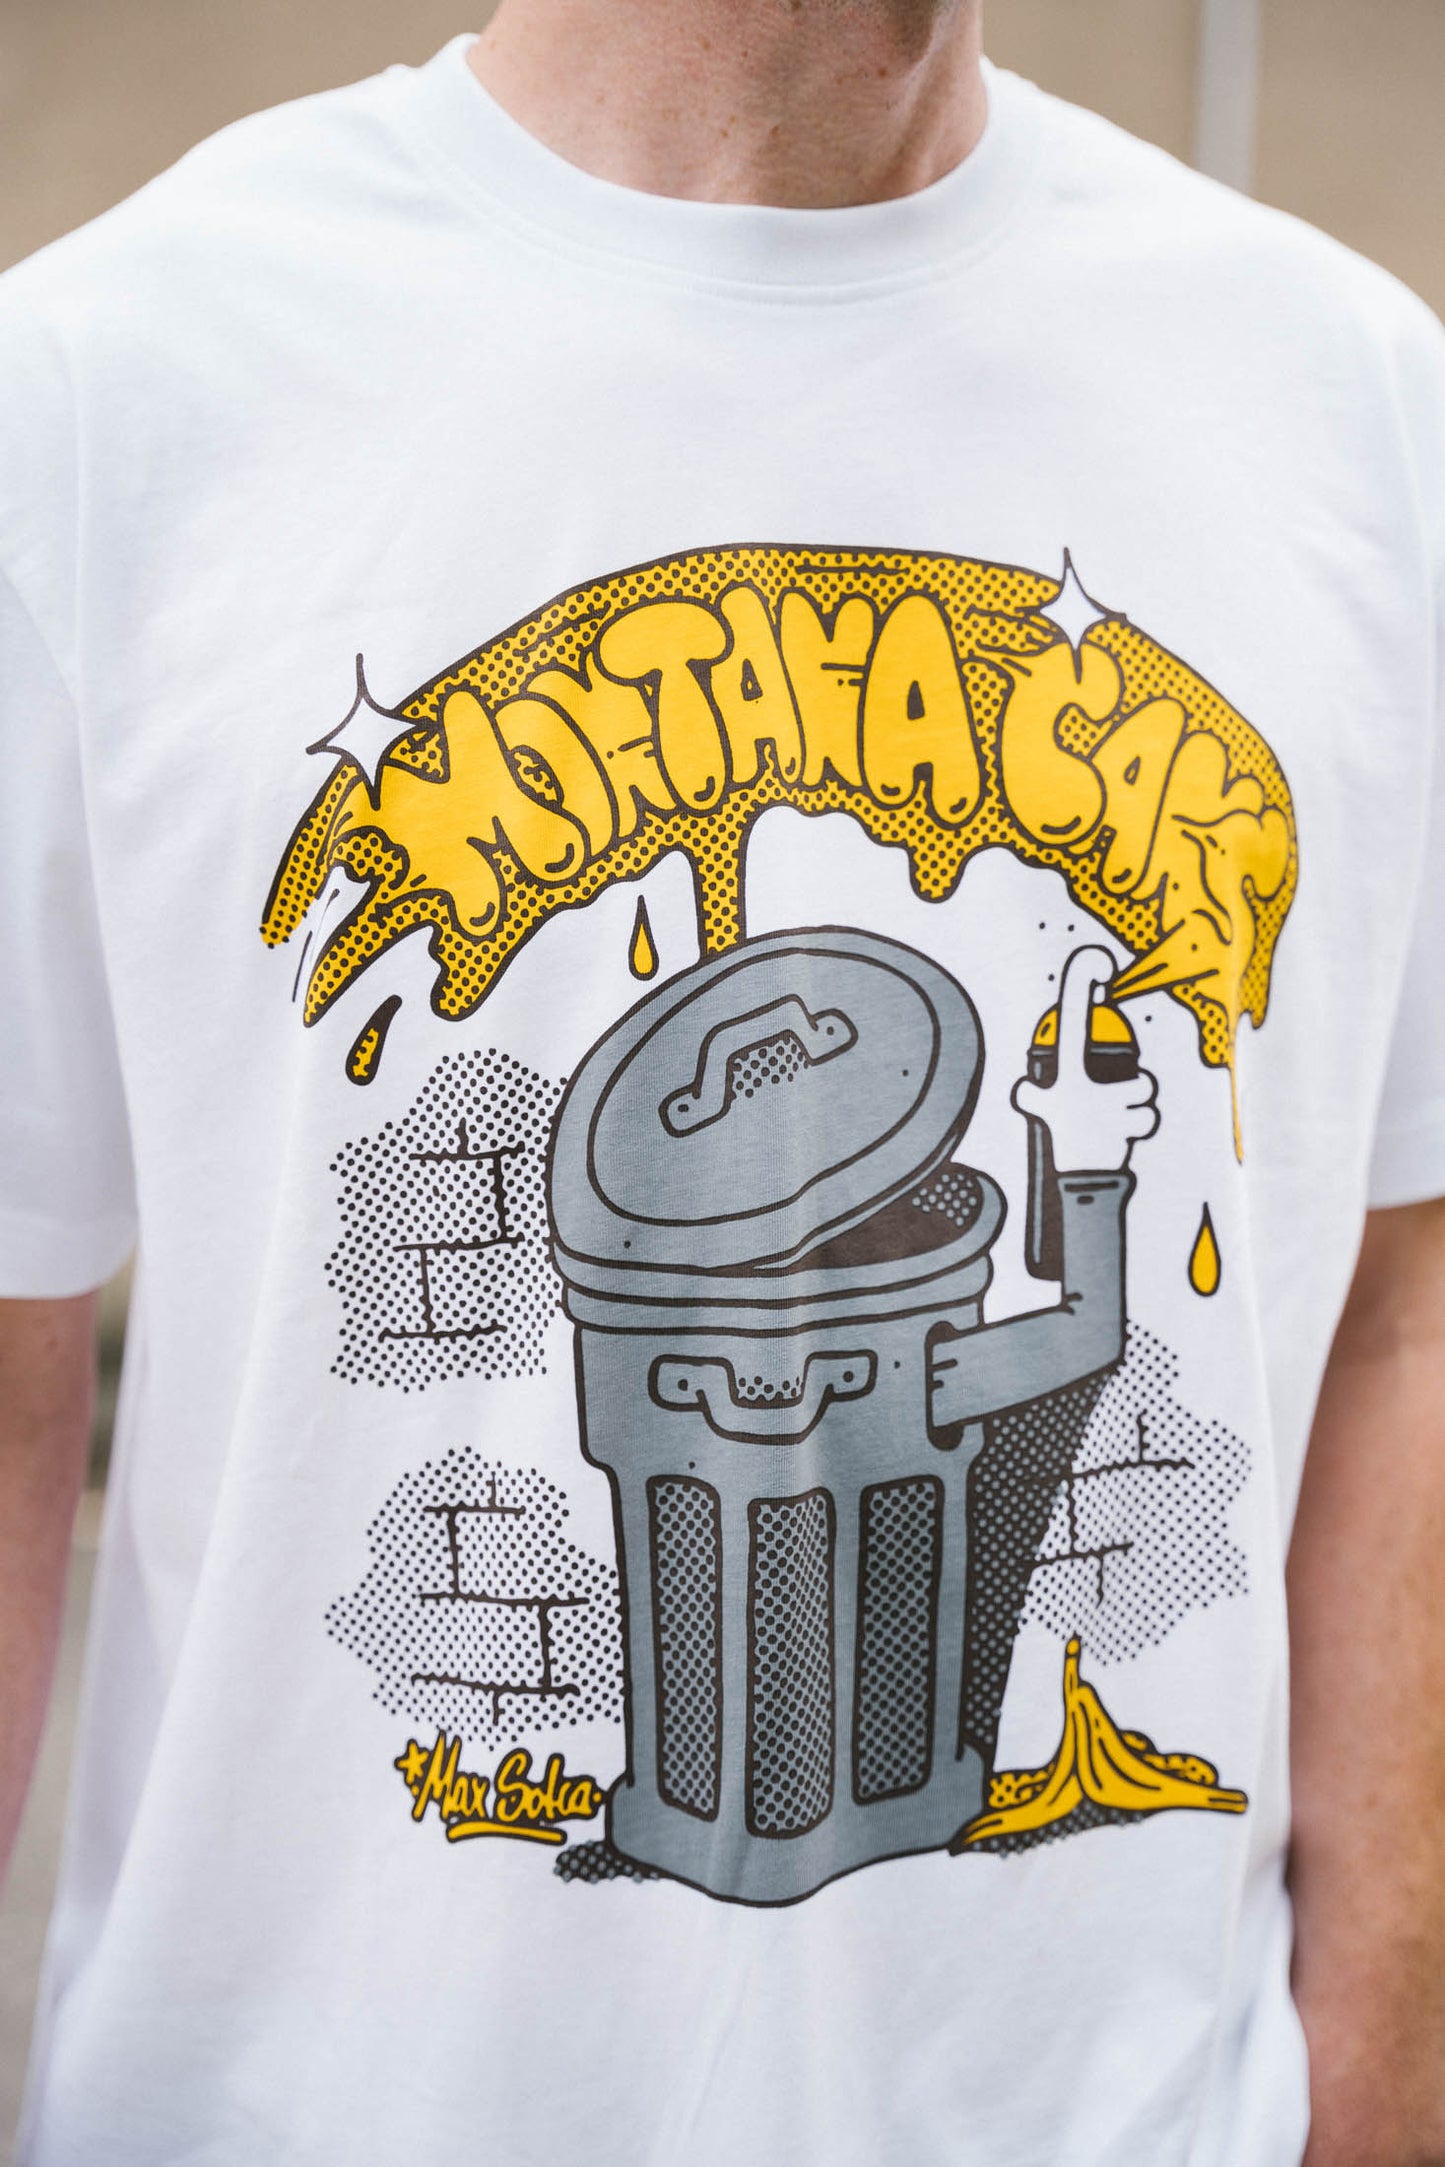 Montana Trash Can by Max Solca